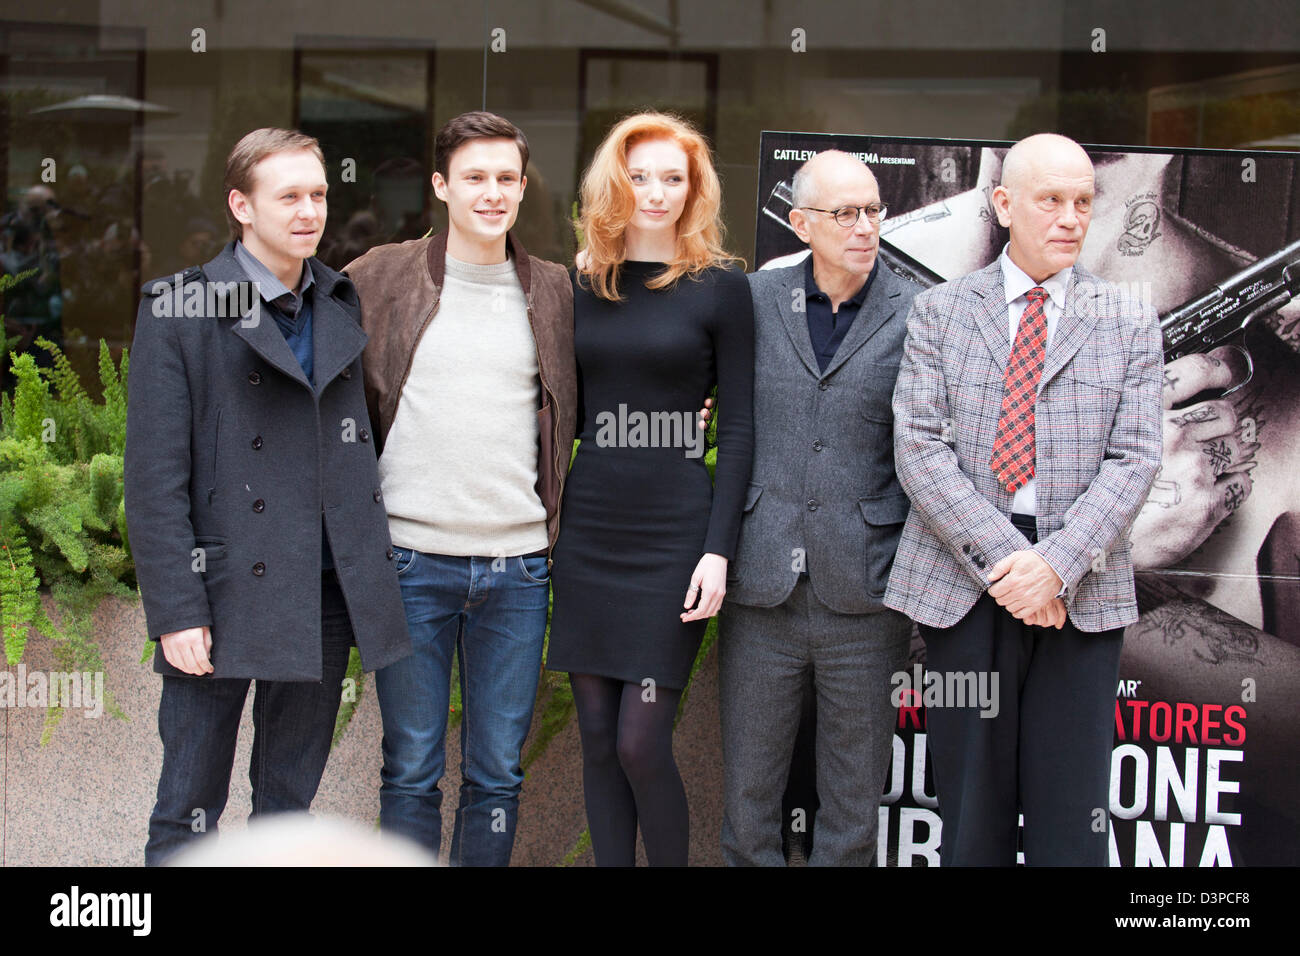 Photocall for the film 'A Siberian Education,' directed by Gabriele Salvatores and starring John Malkovich. Rome, Italy. 22 Feb 2013 Stock Photo